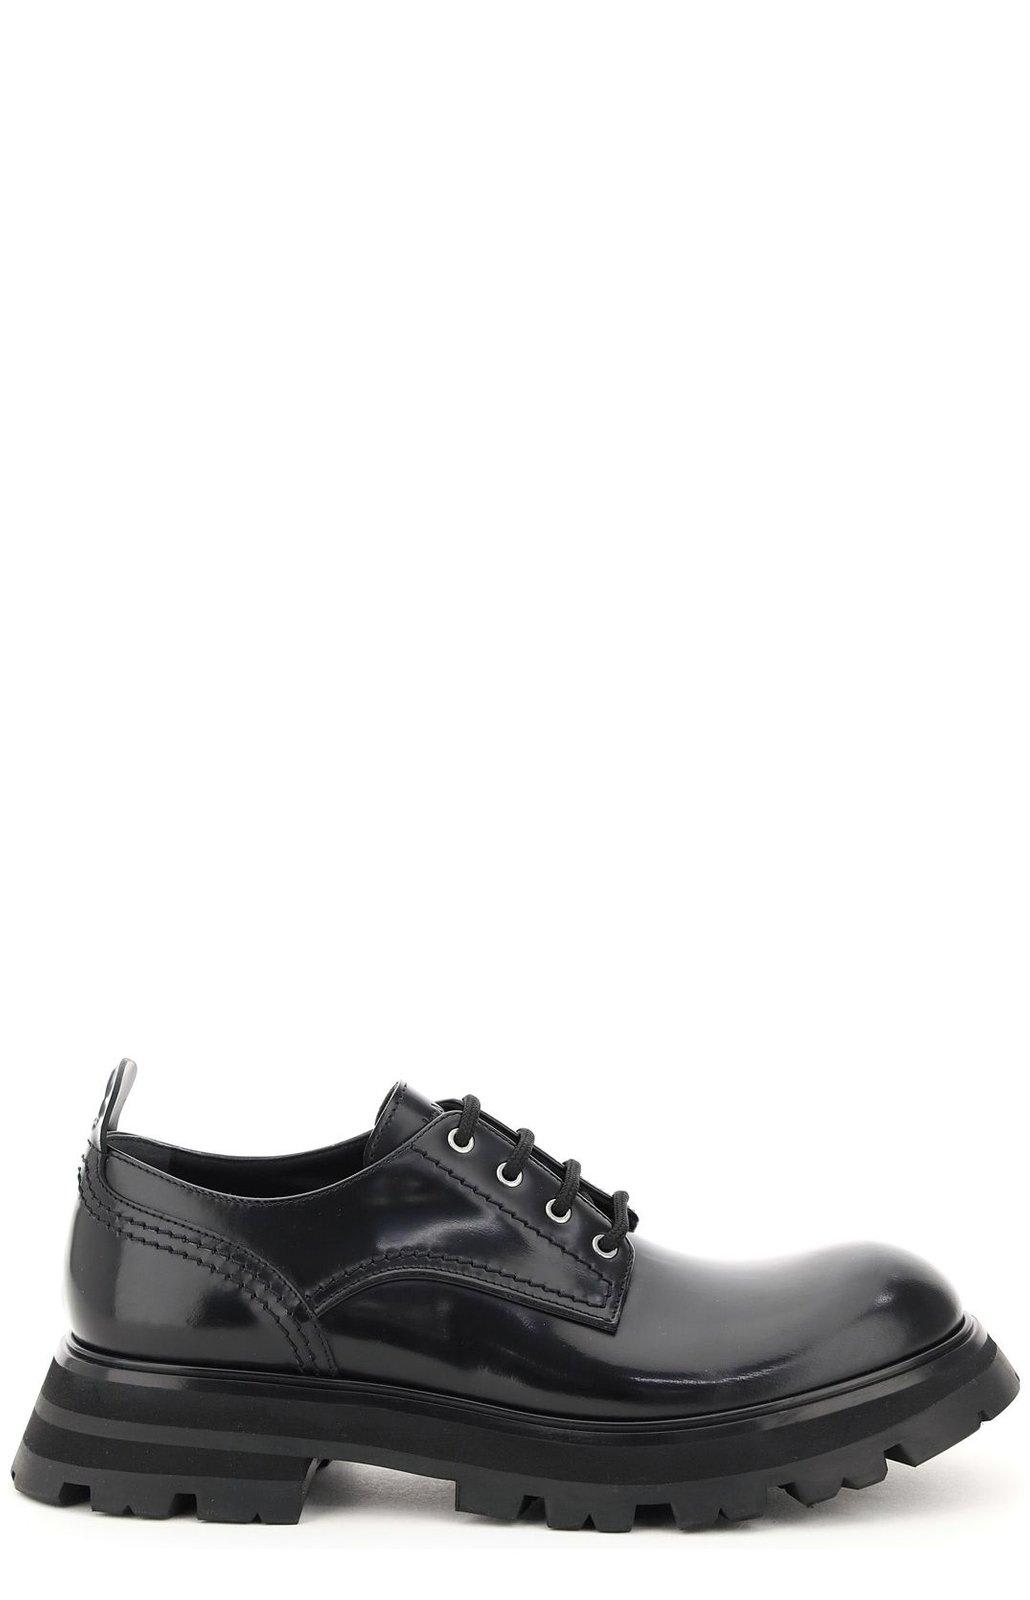 Alexander McQueen Wander Lace-up Shoes